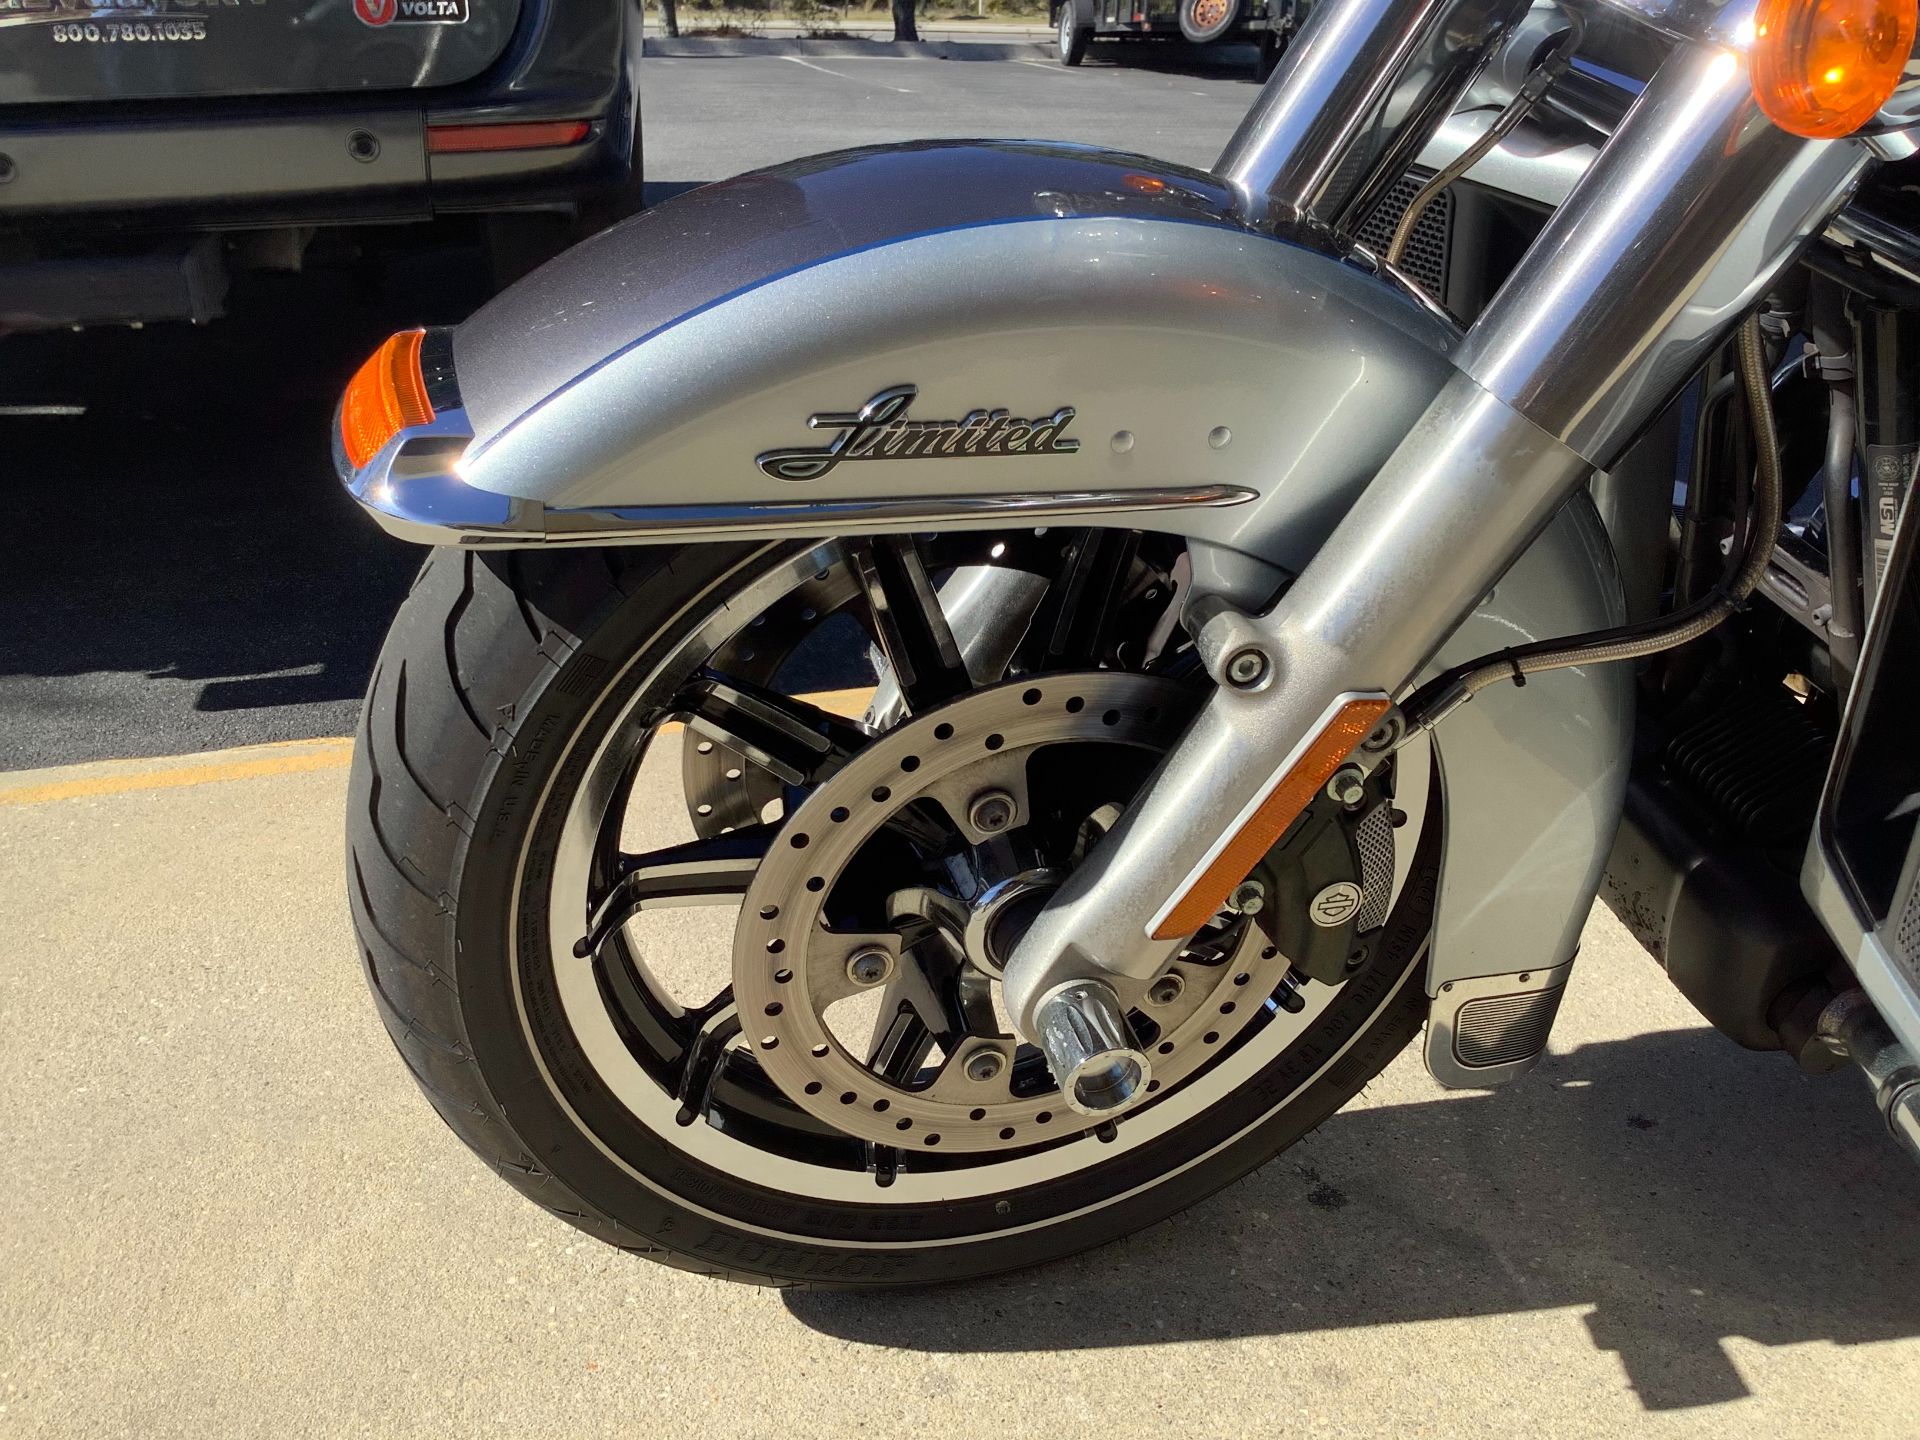 2014 Harley-Davidson ELECTRA GLIDE ULTRA LIMITED TWO TONE in Panama City Beach, Florida - Photo 20